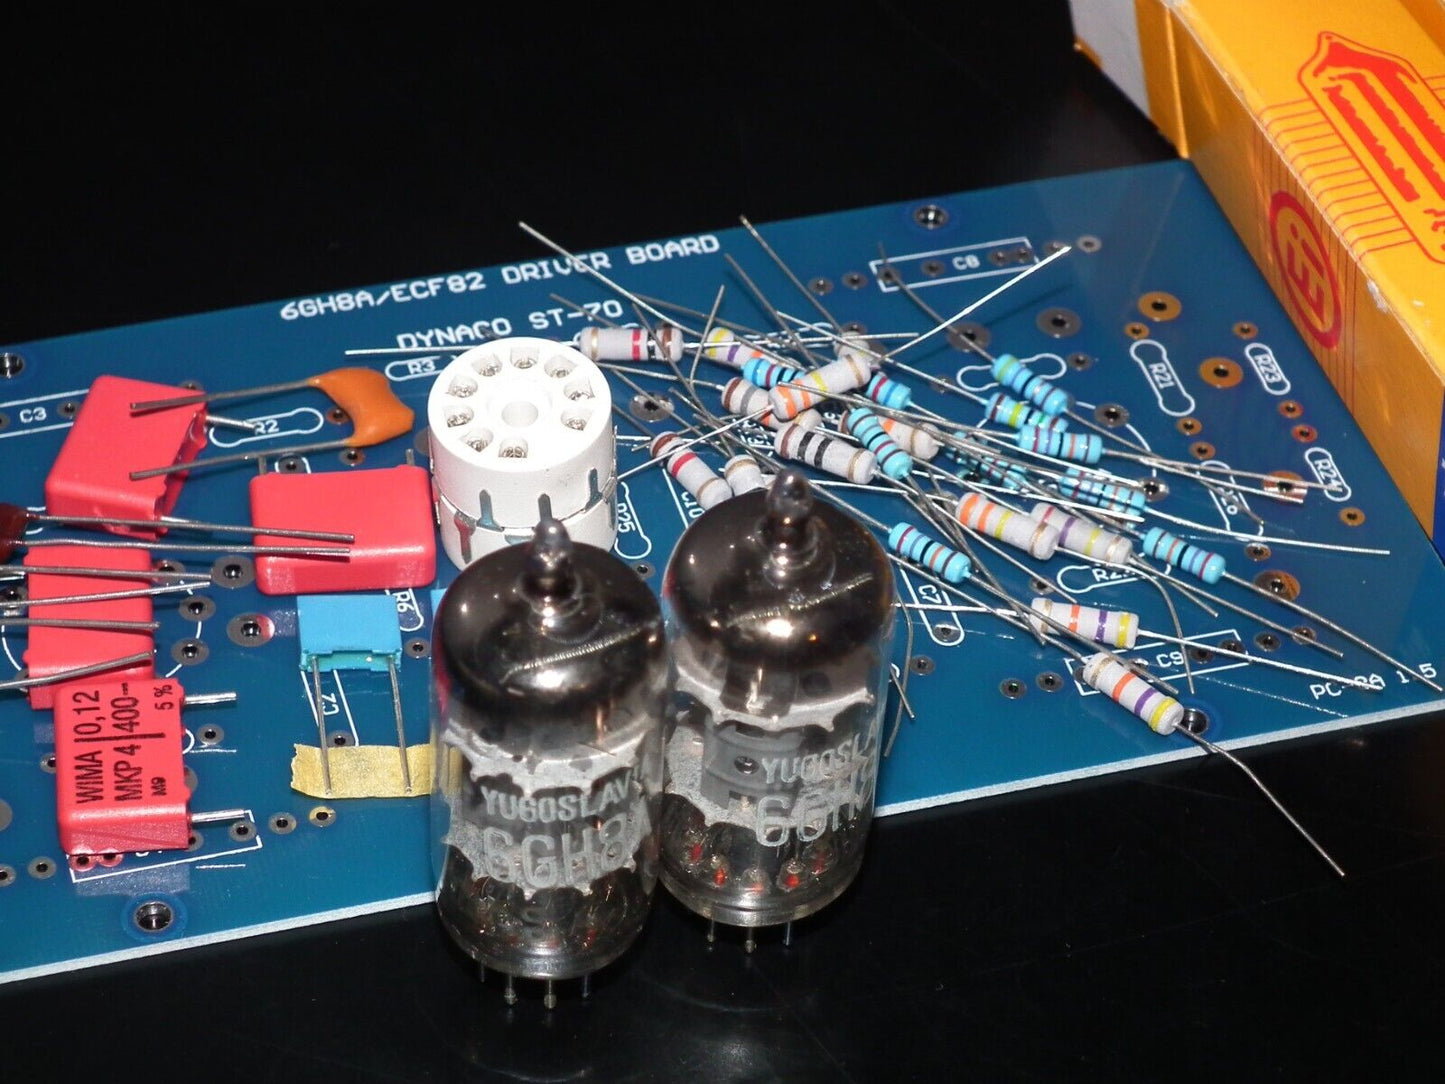 DYNACO ST-70 6GH8A / 6GH8 COMPLETE KIT PC-3 DRIVER BOARD WITH TUBES (NOS Platinum matched pair of 6GH8A EI Philips)